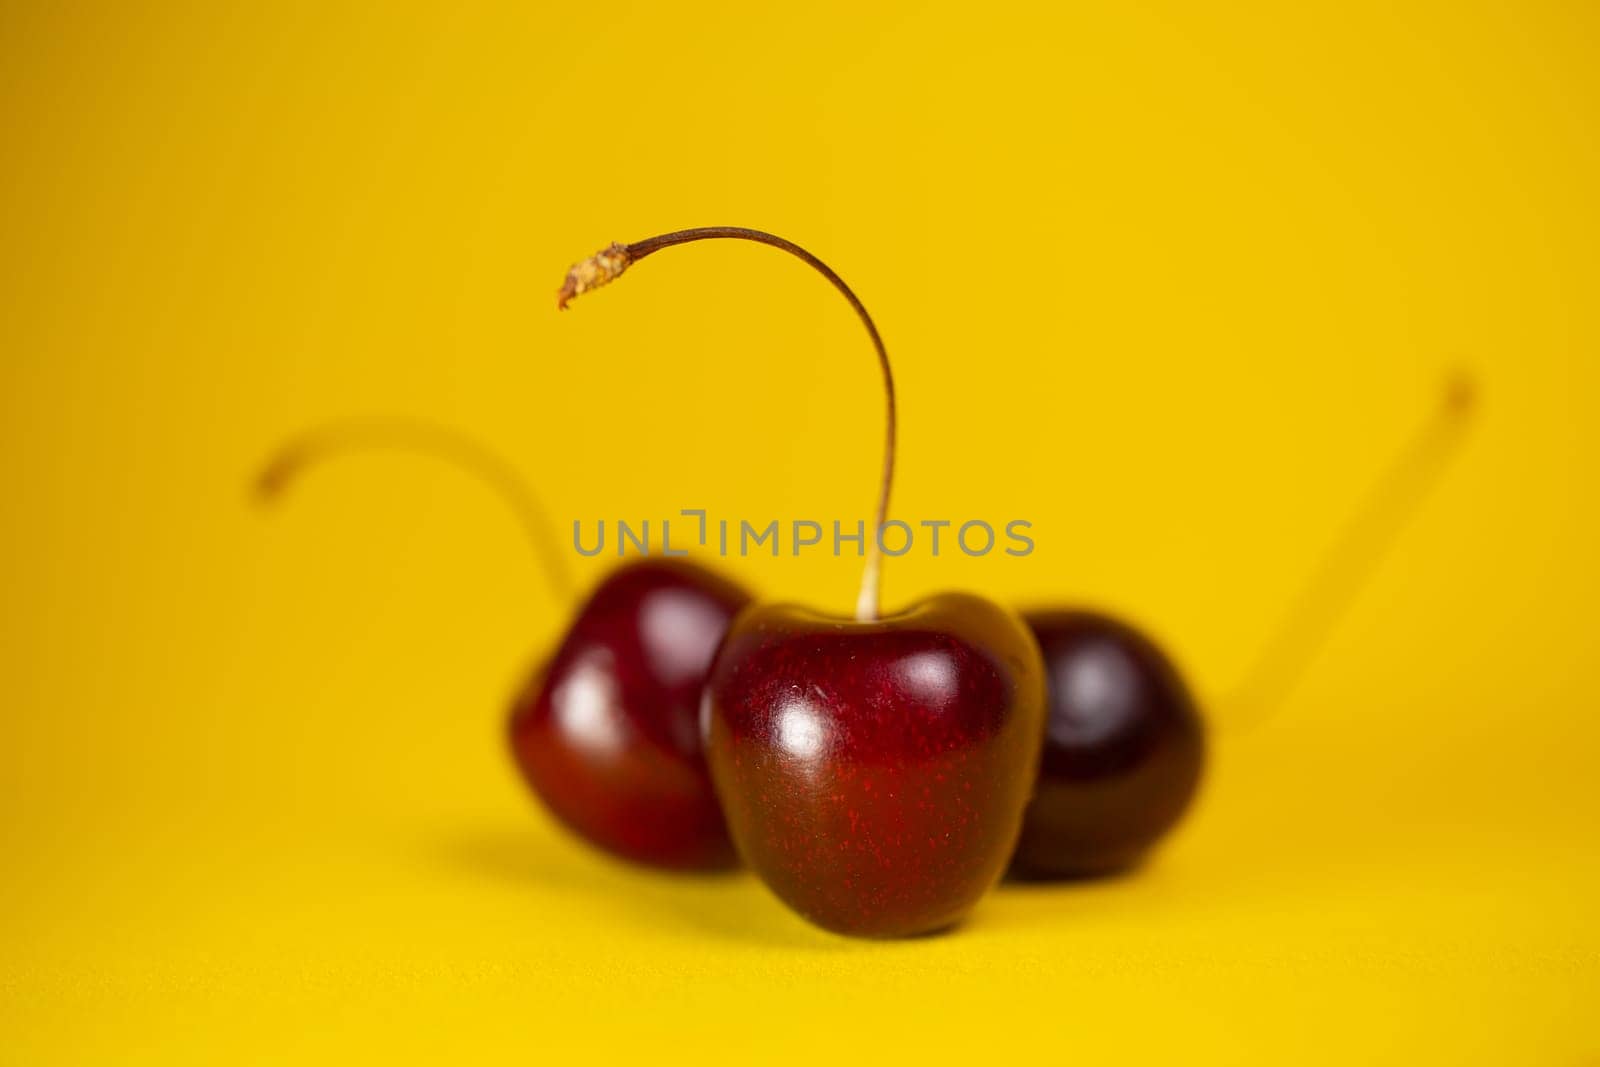 three cherries on a yellow background close-up by Pukhovskiy